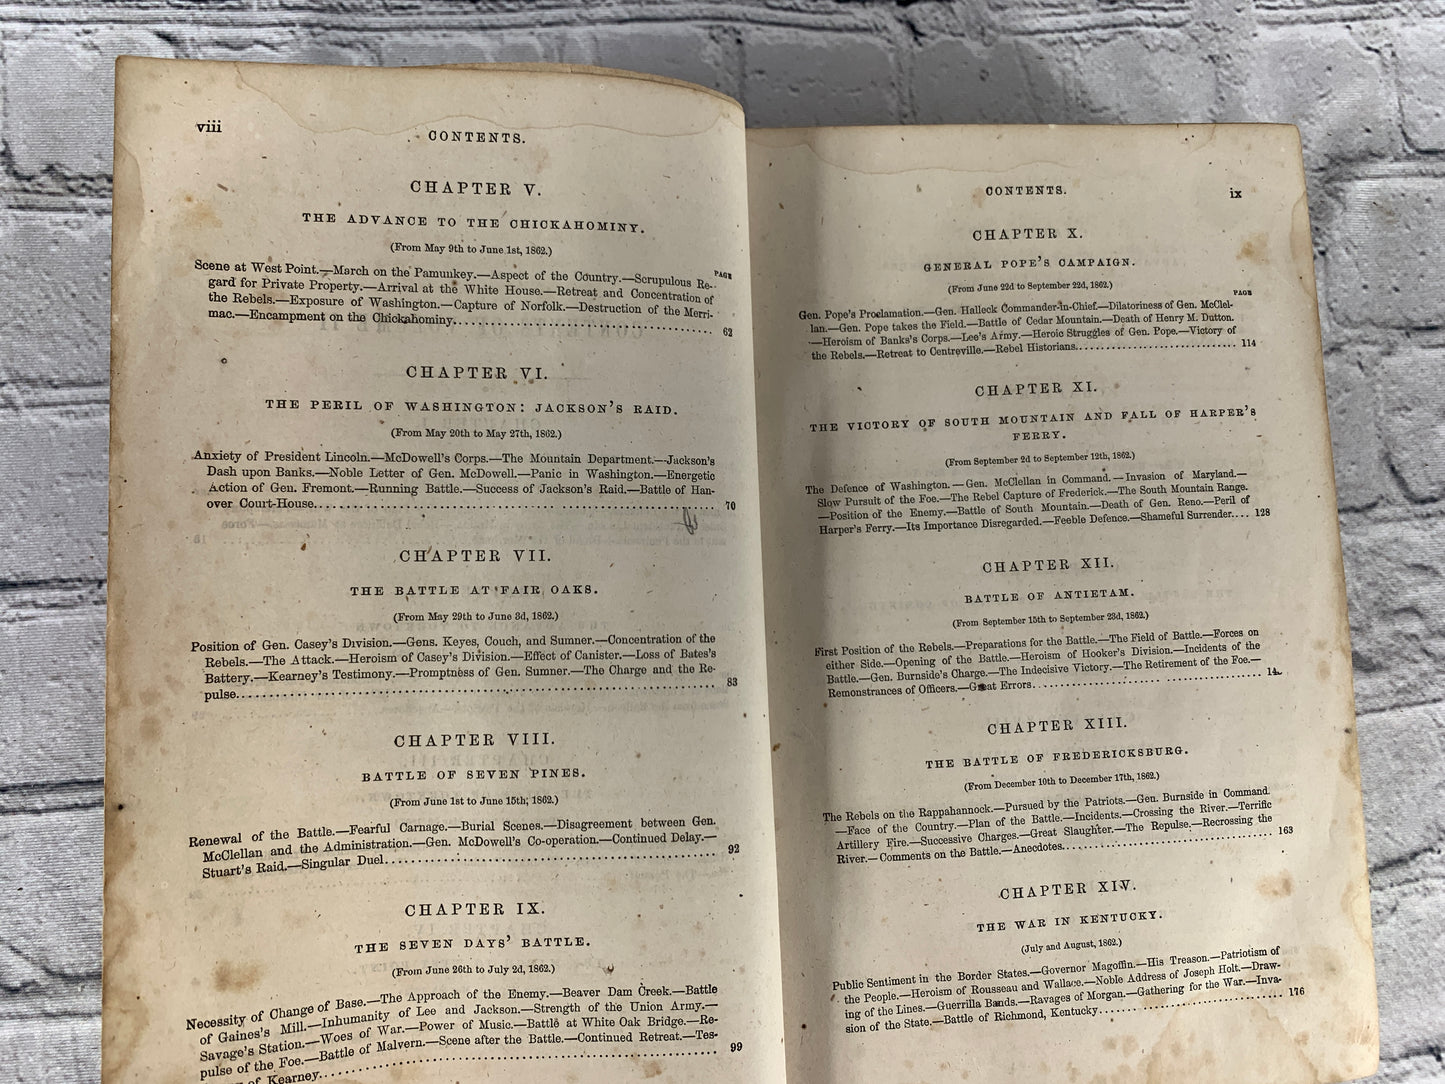 The History of the Civil War in America by J. Abbott [Vol 1 & 2 ·  1863 & 1866]